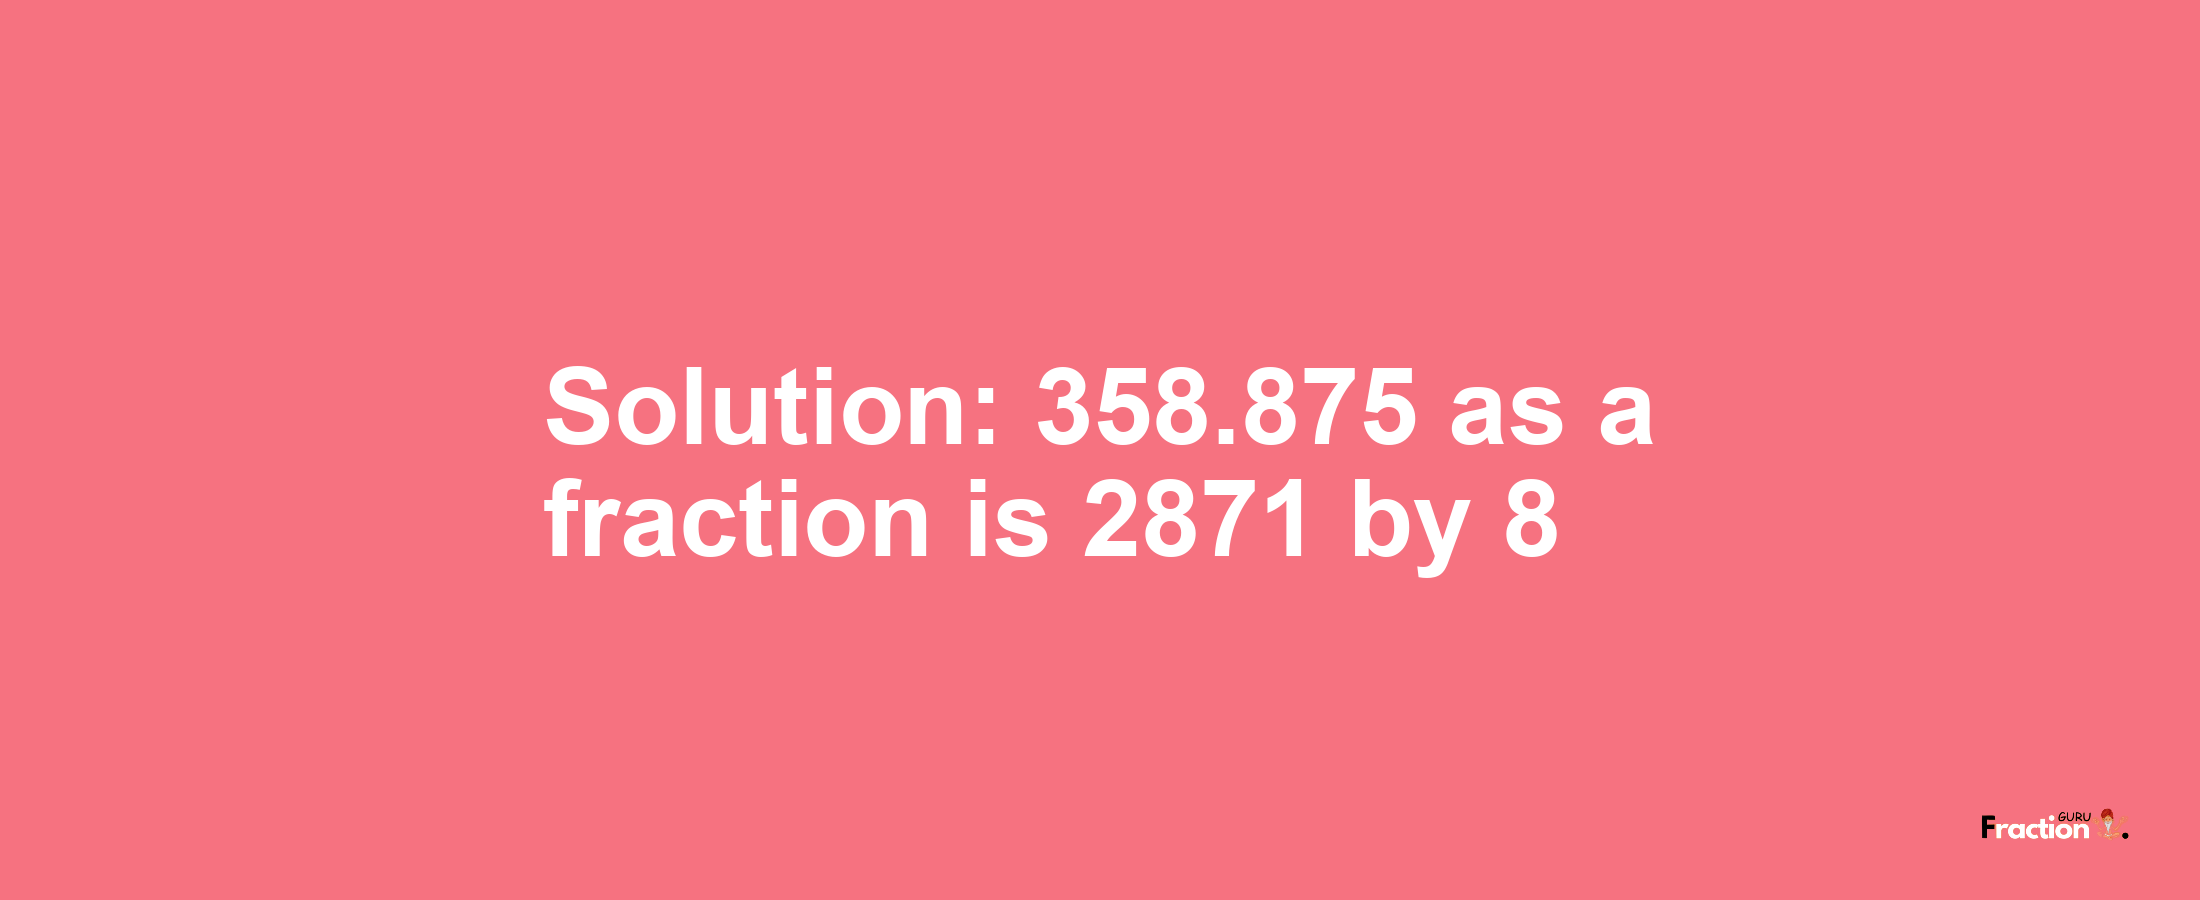 Solution:358.875 as a fraction is 2871/8